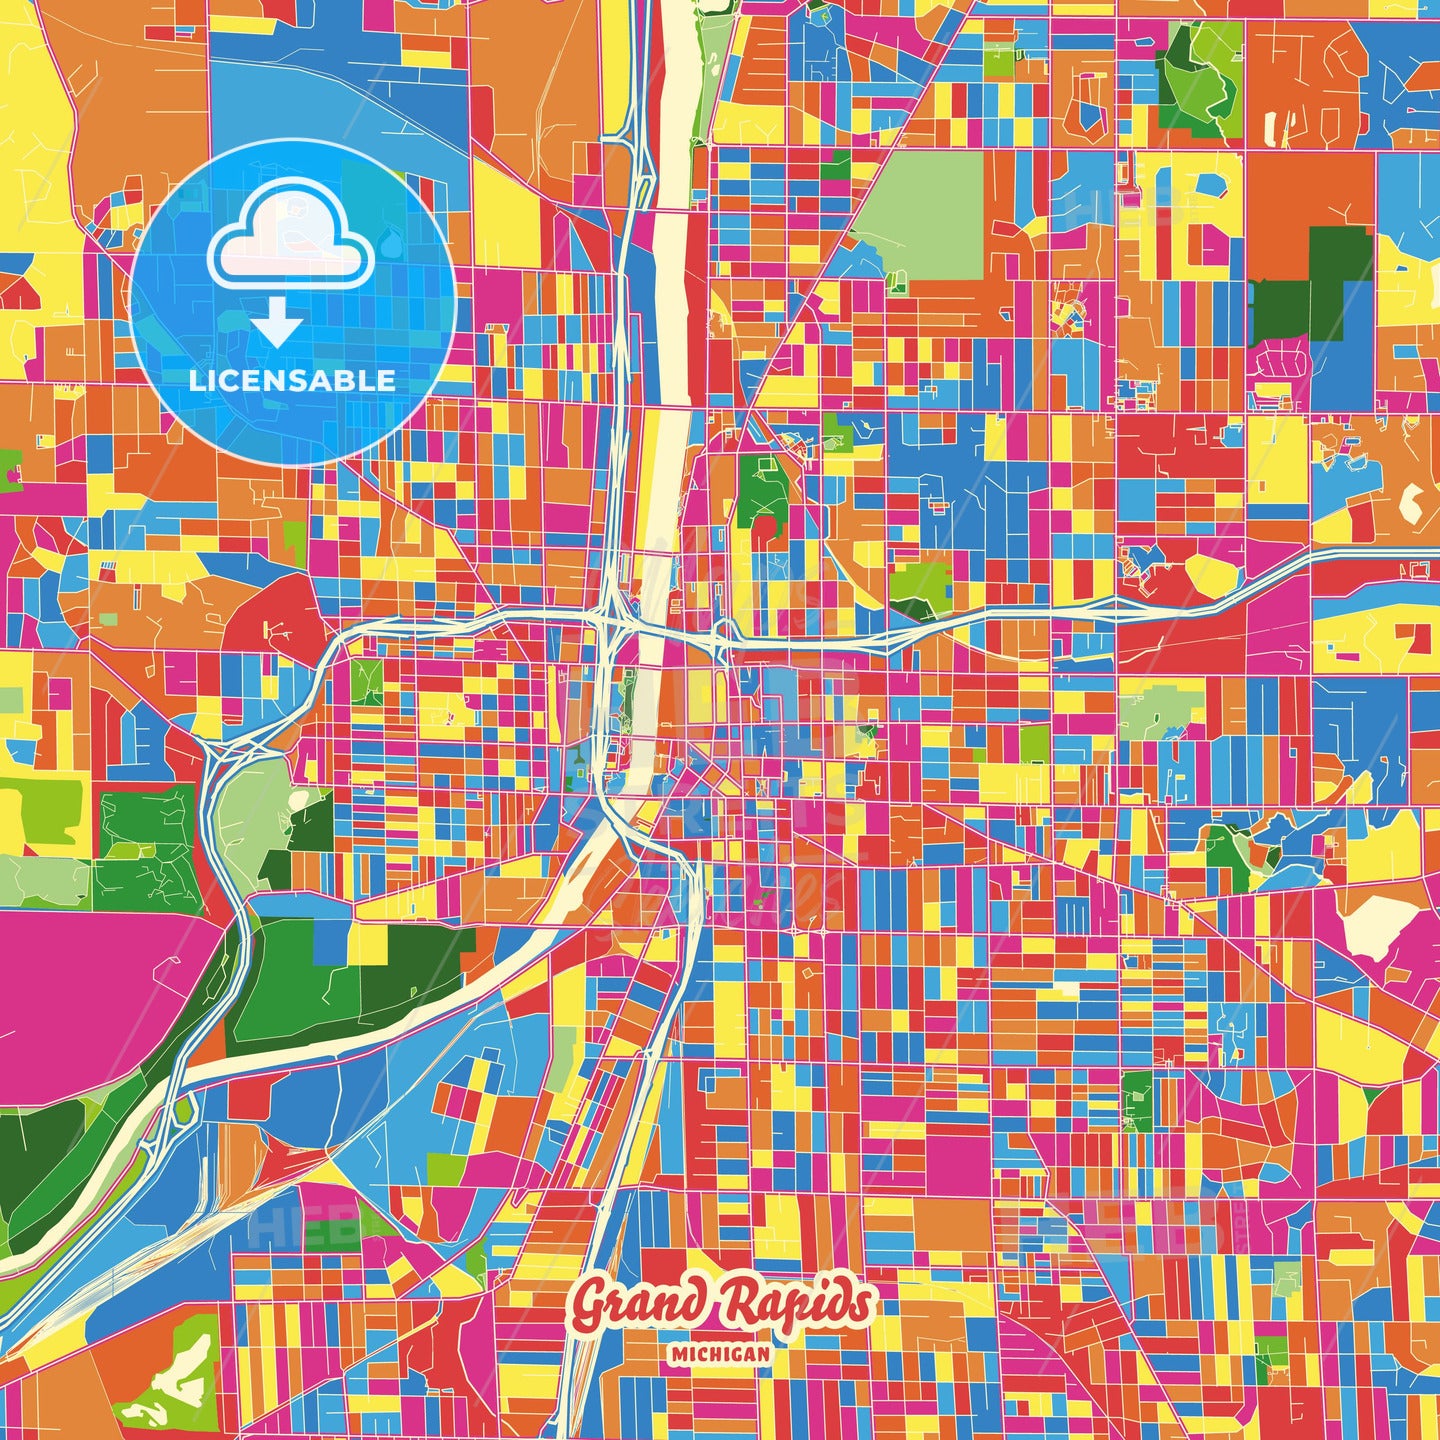 Grand Rapids, United States Crazy Colorful Street Map Poster Template - HEBSTREITS Sketches